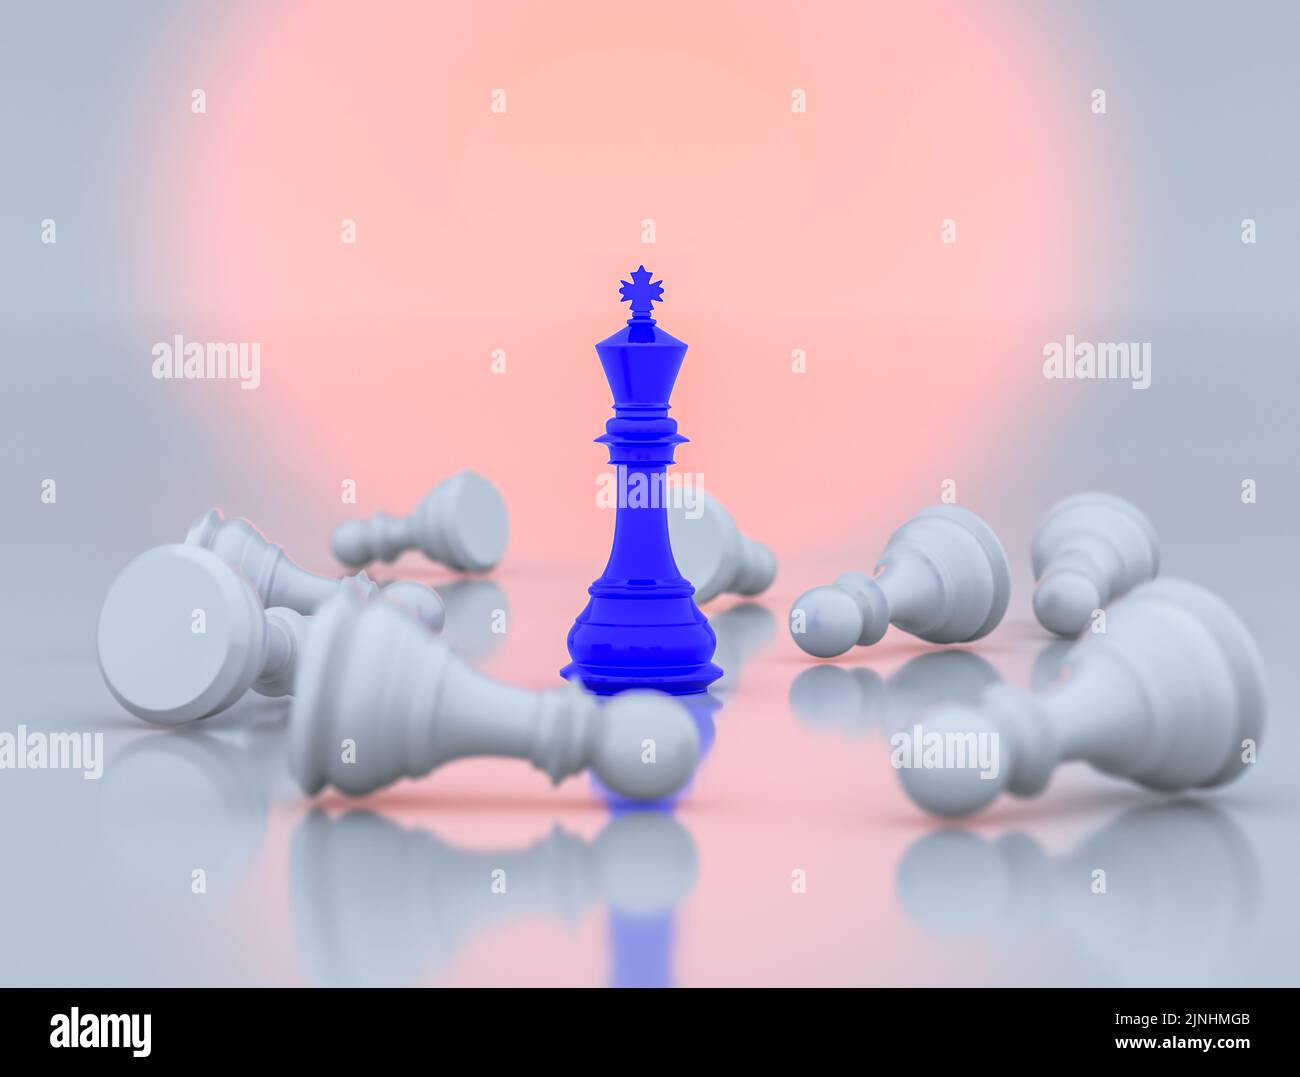 Blue chess king standing in the middle of scattered white chess pieces, concept of victory, competition and business. 3d illustrations Stock Photo